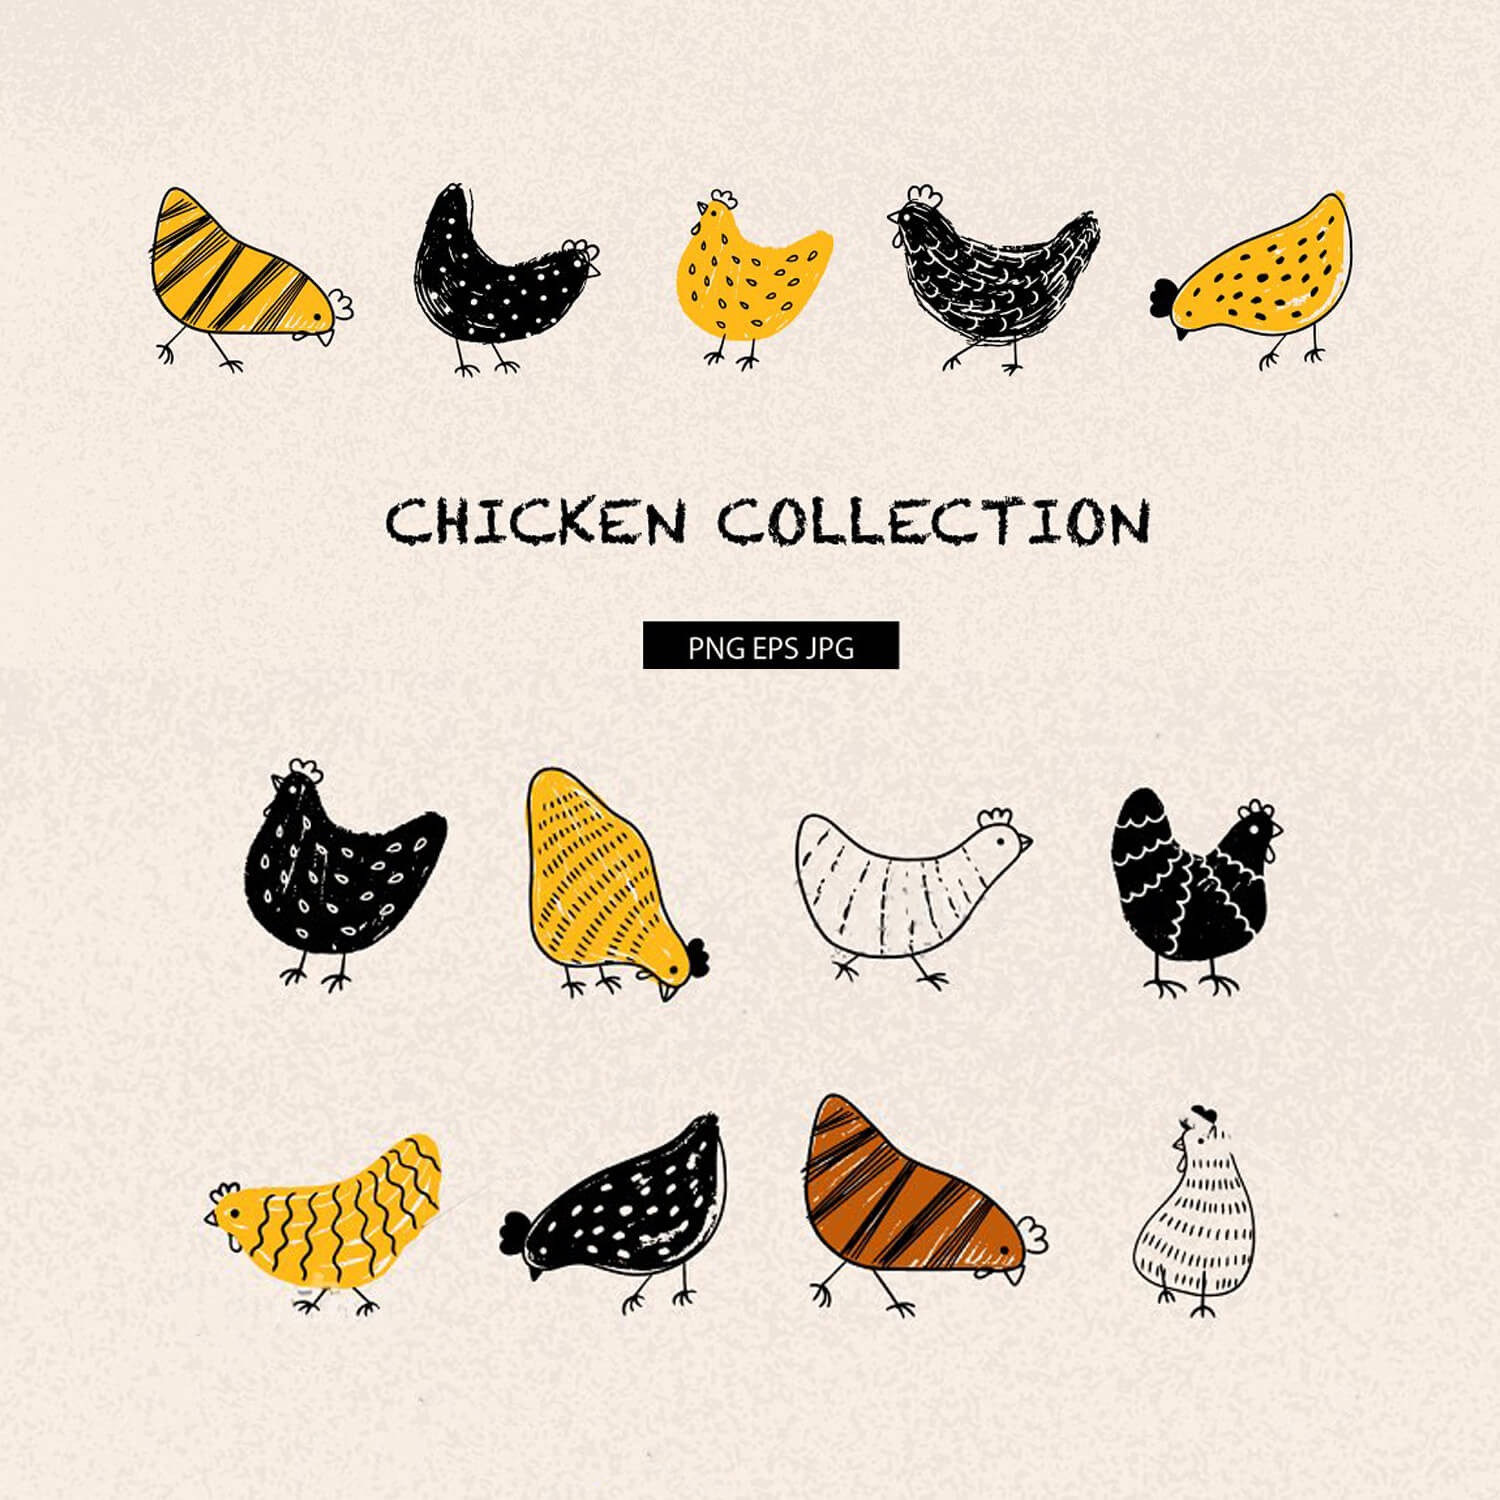 The image of chickens in stripes, dots, in wavy lines.